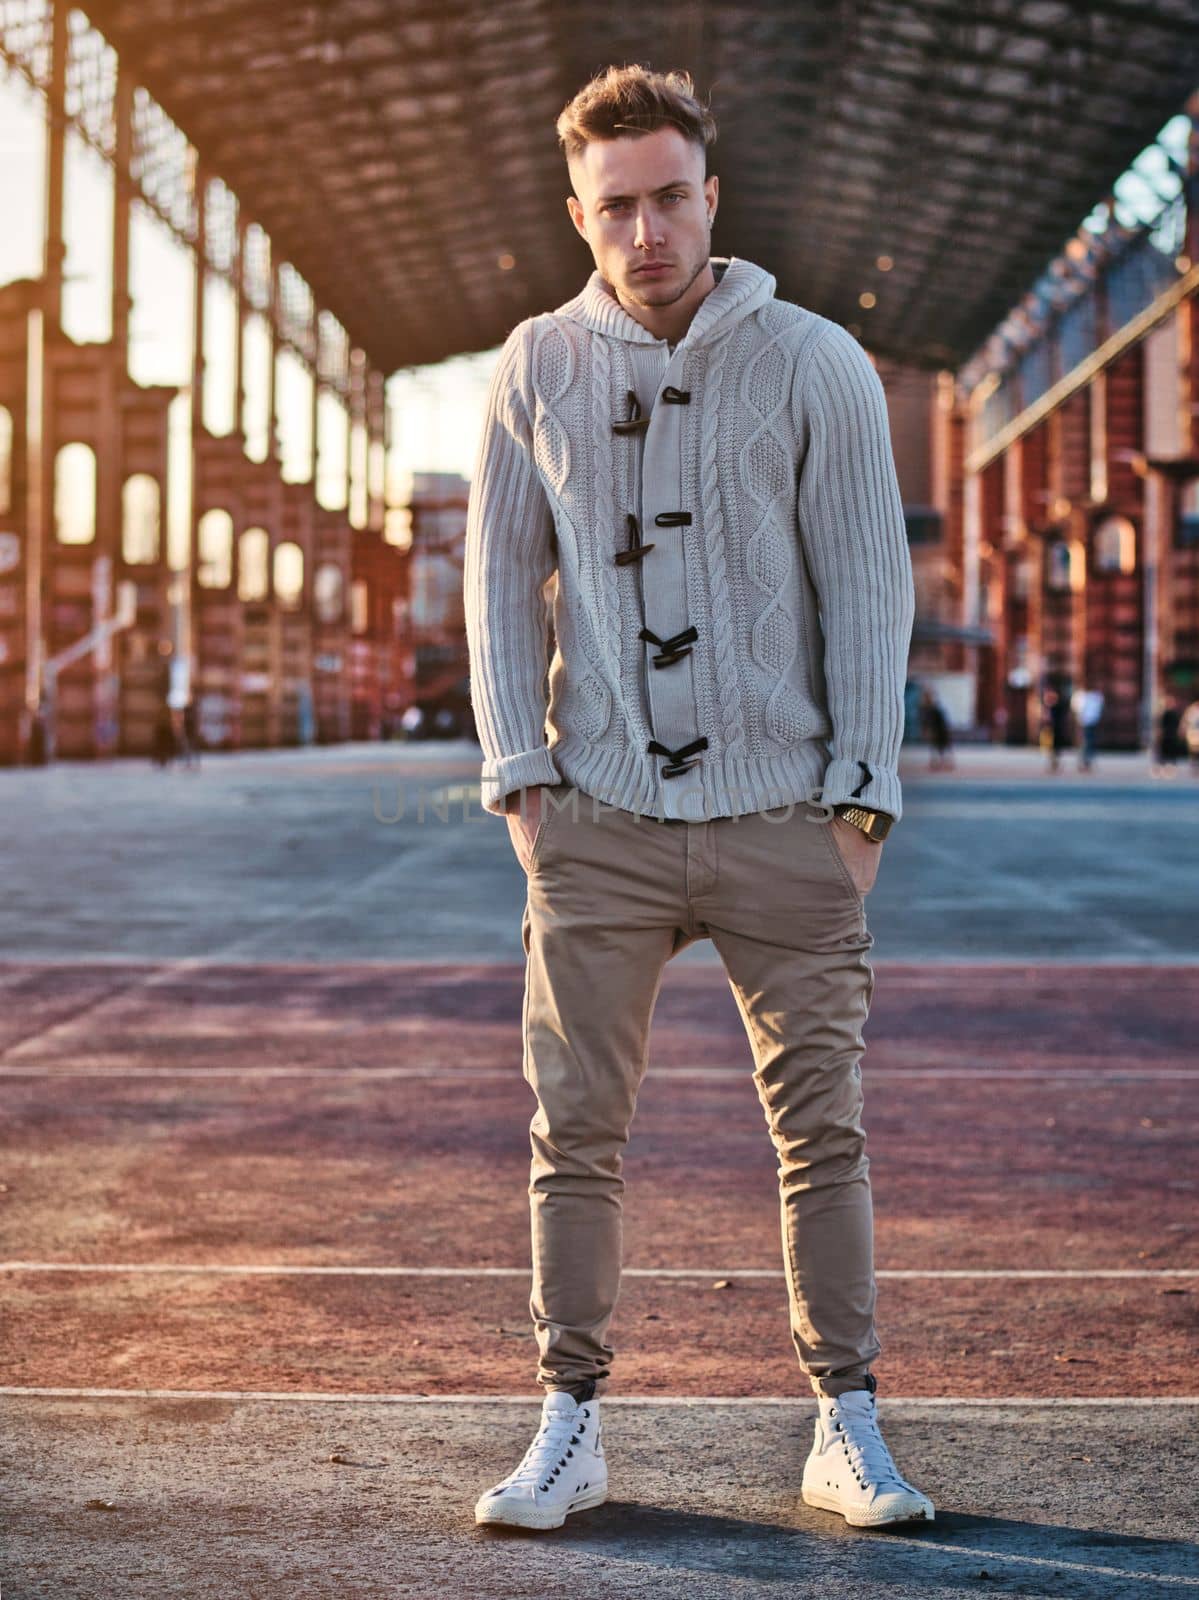 Handsome young man standing in modern urban setting, looking at camera, with winter cardigan